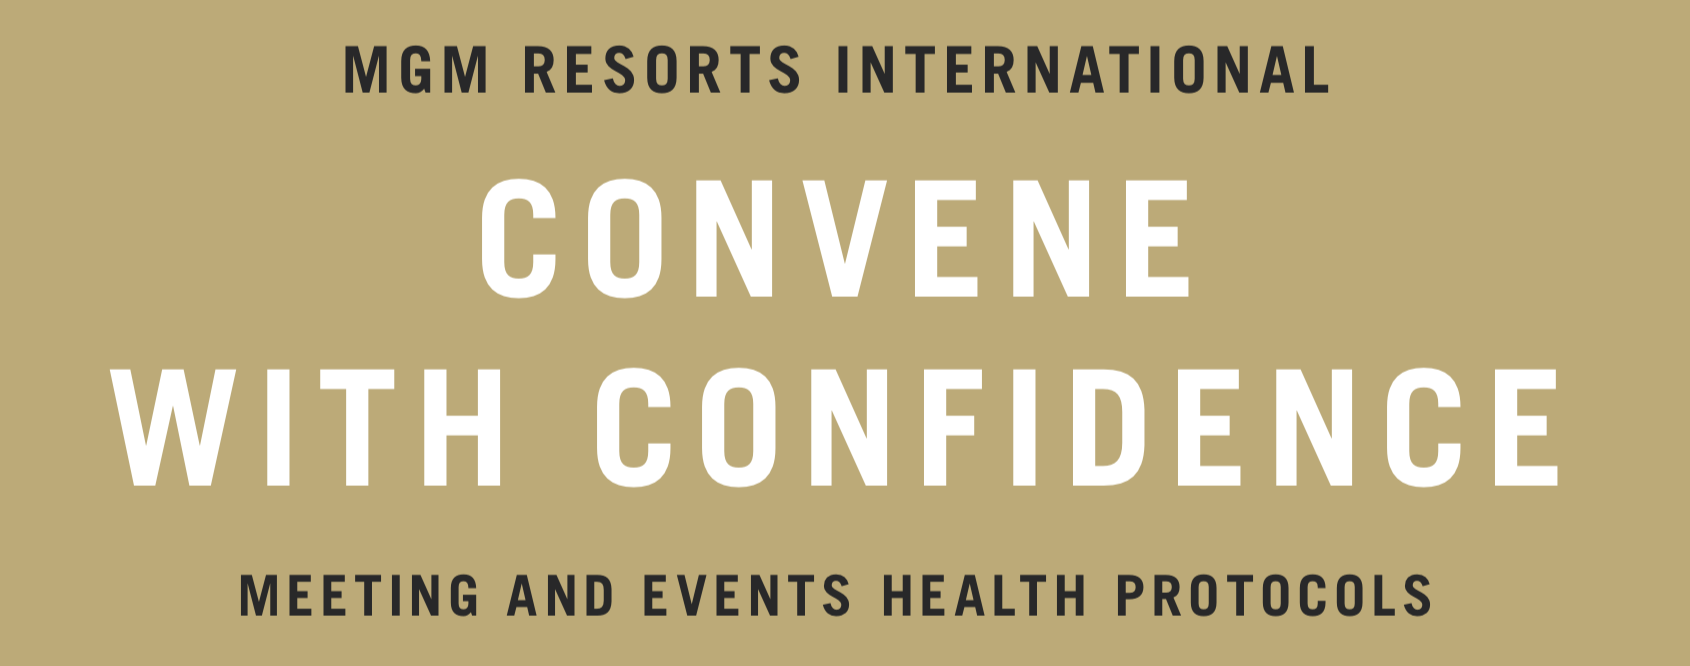 MGM Resorts International Announces Comprehensive Health And Safety